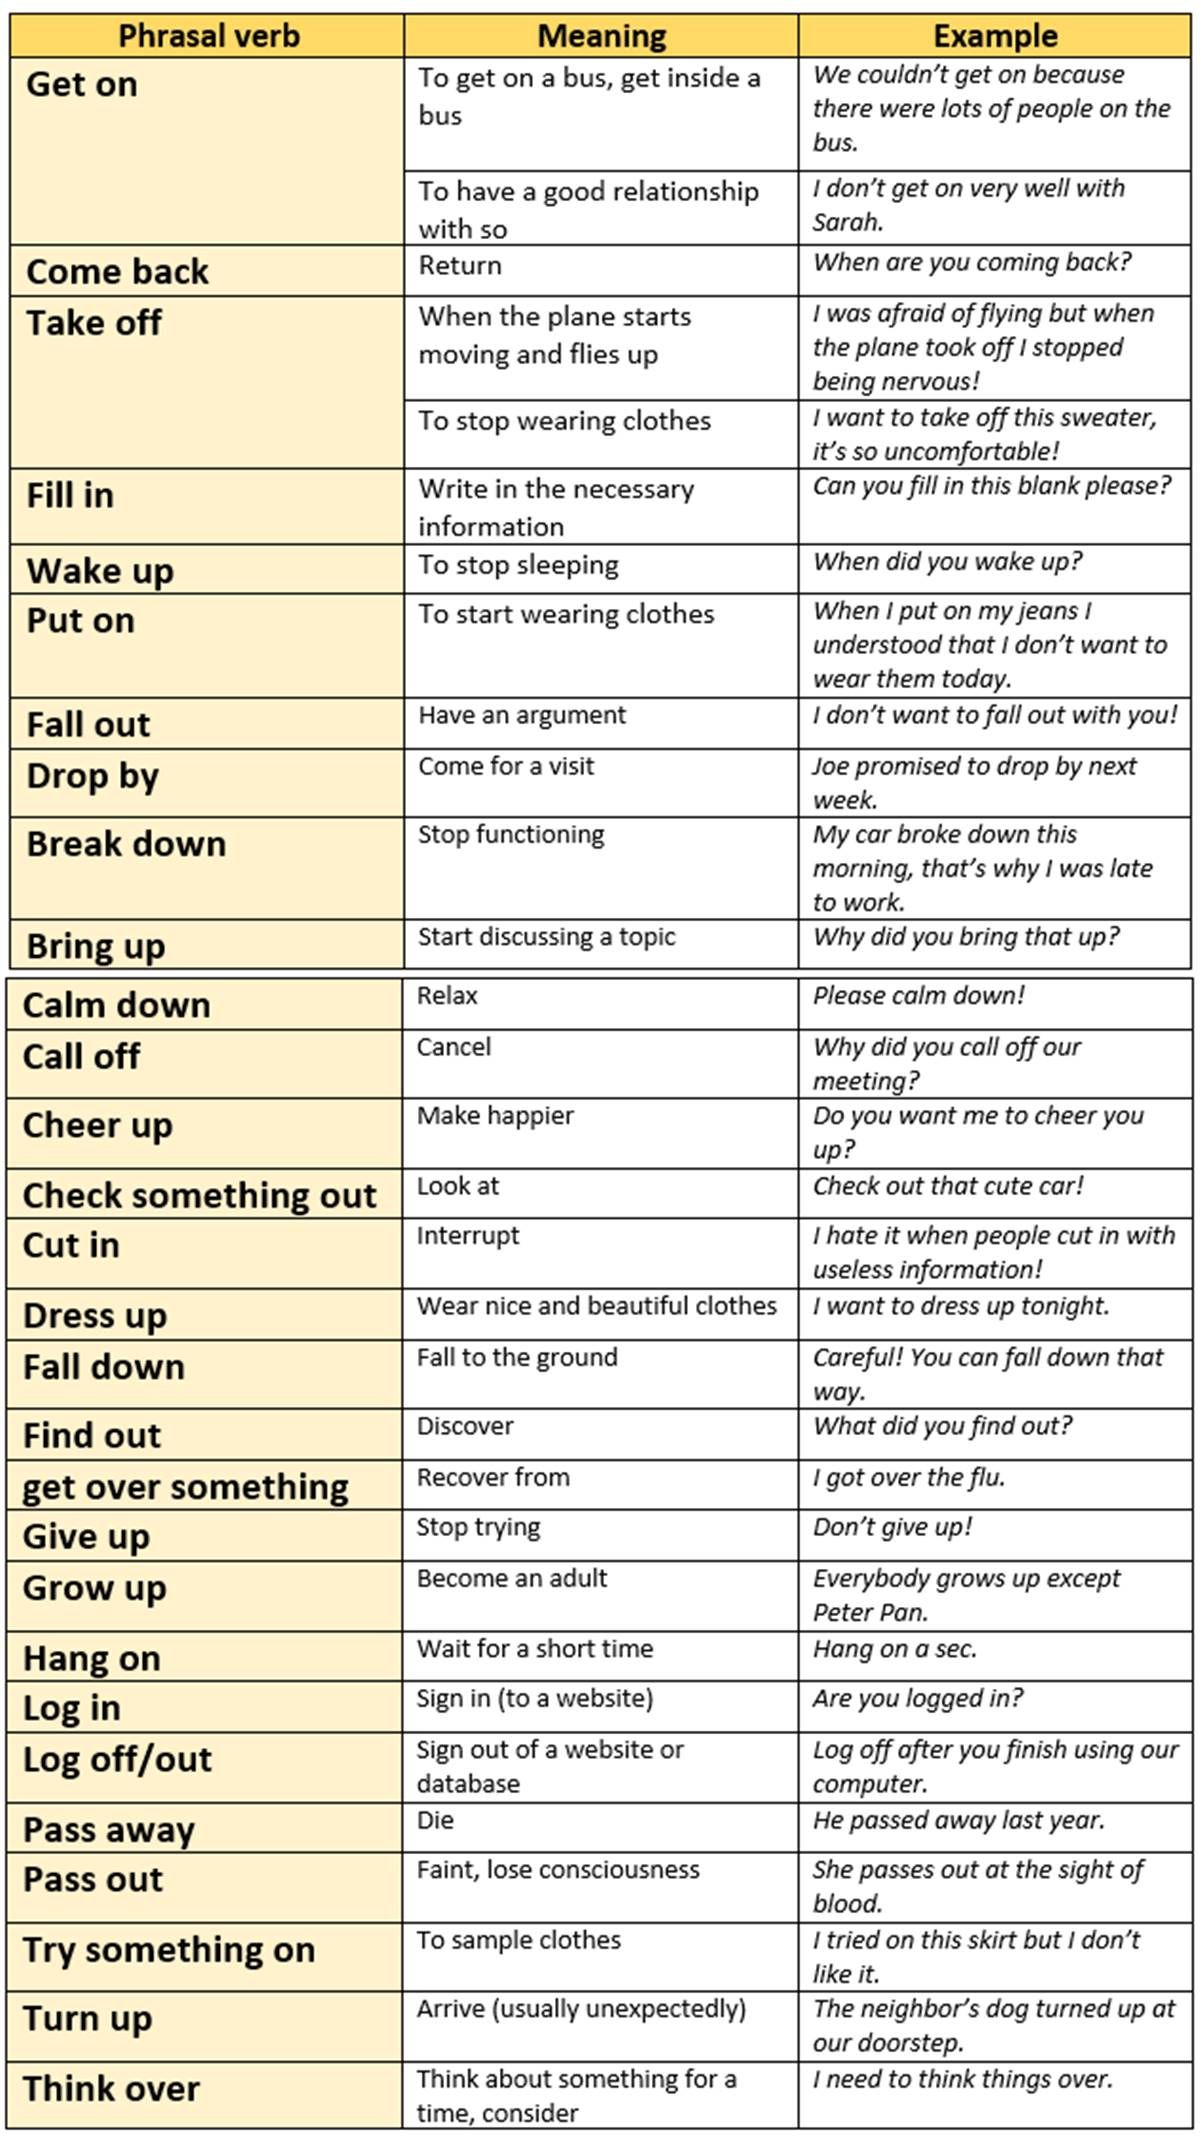 b1-phrasal-verbs-1-exercises-and-explanation-page-2-of-3-test-english